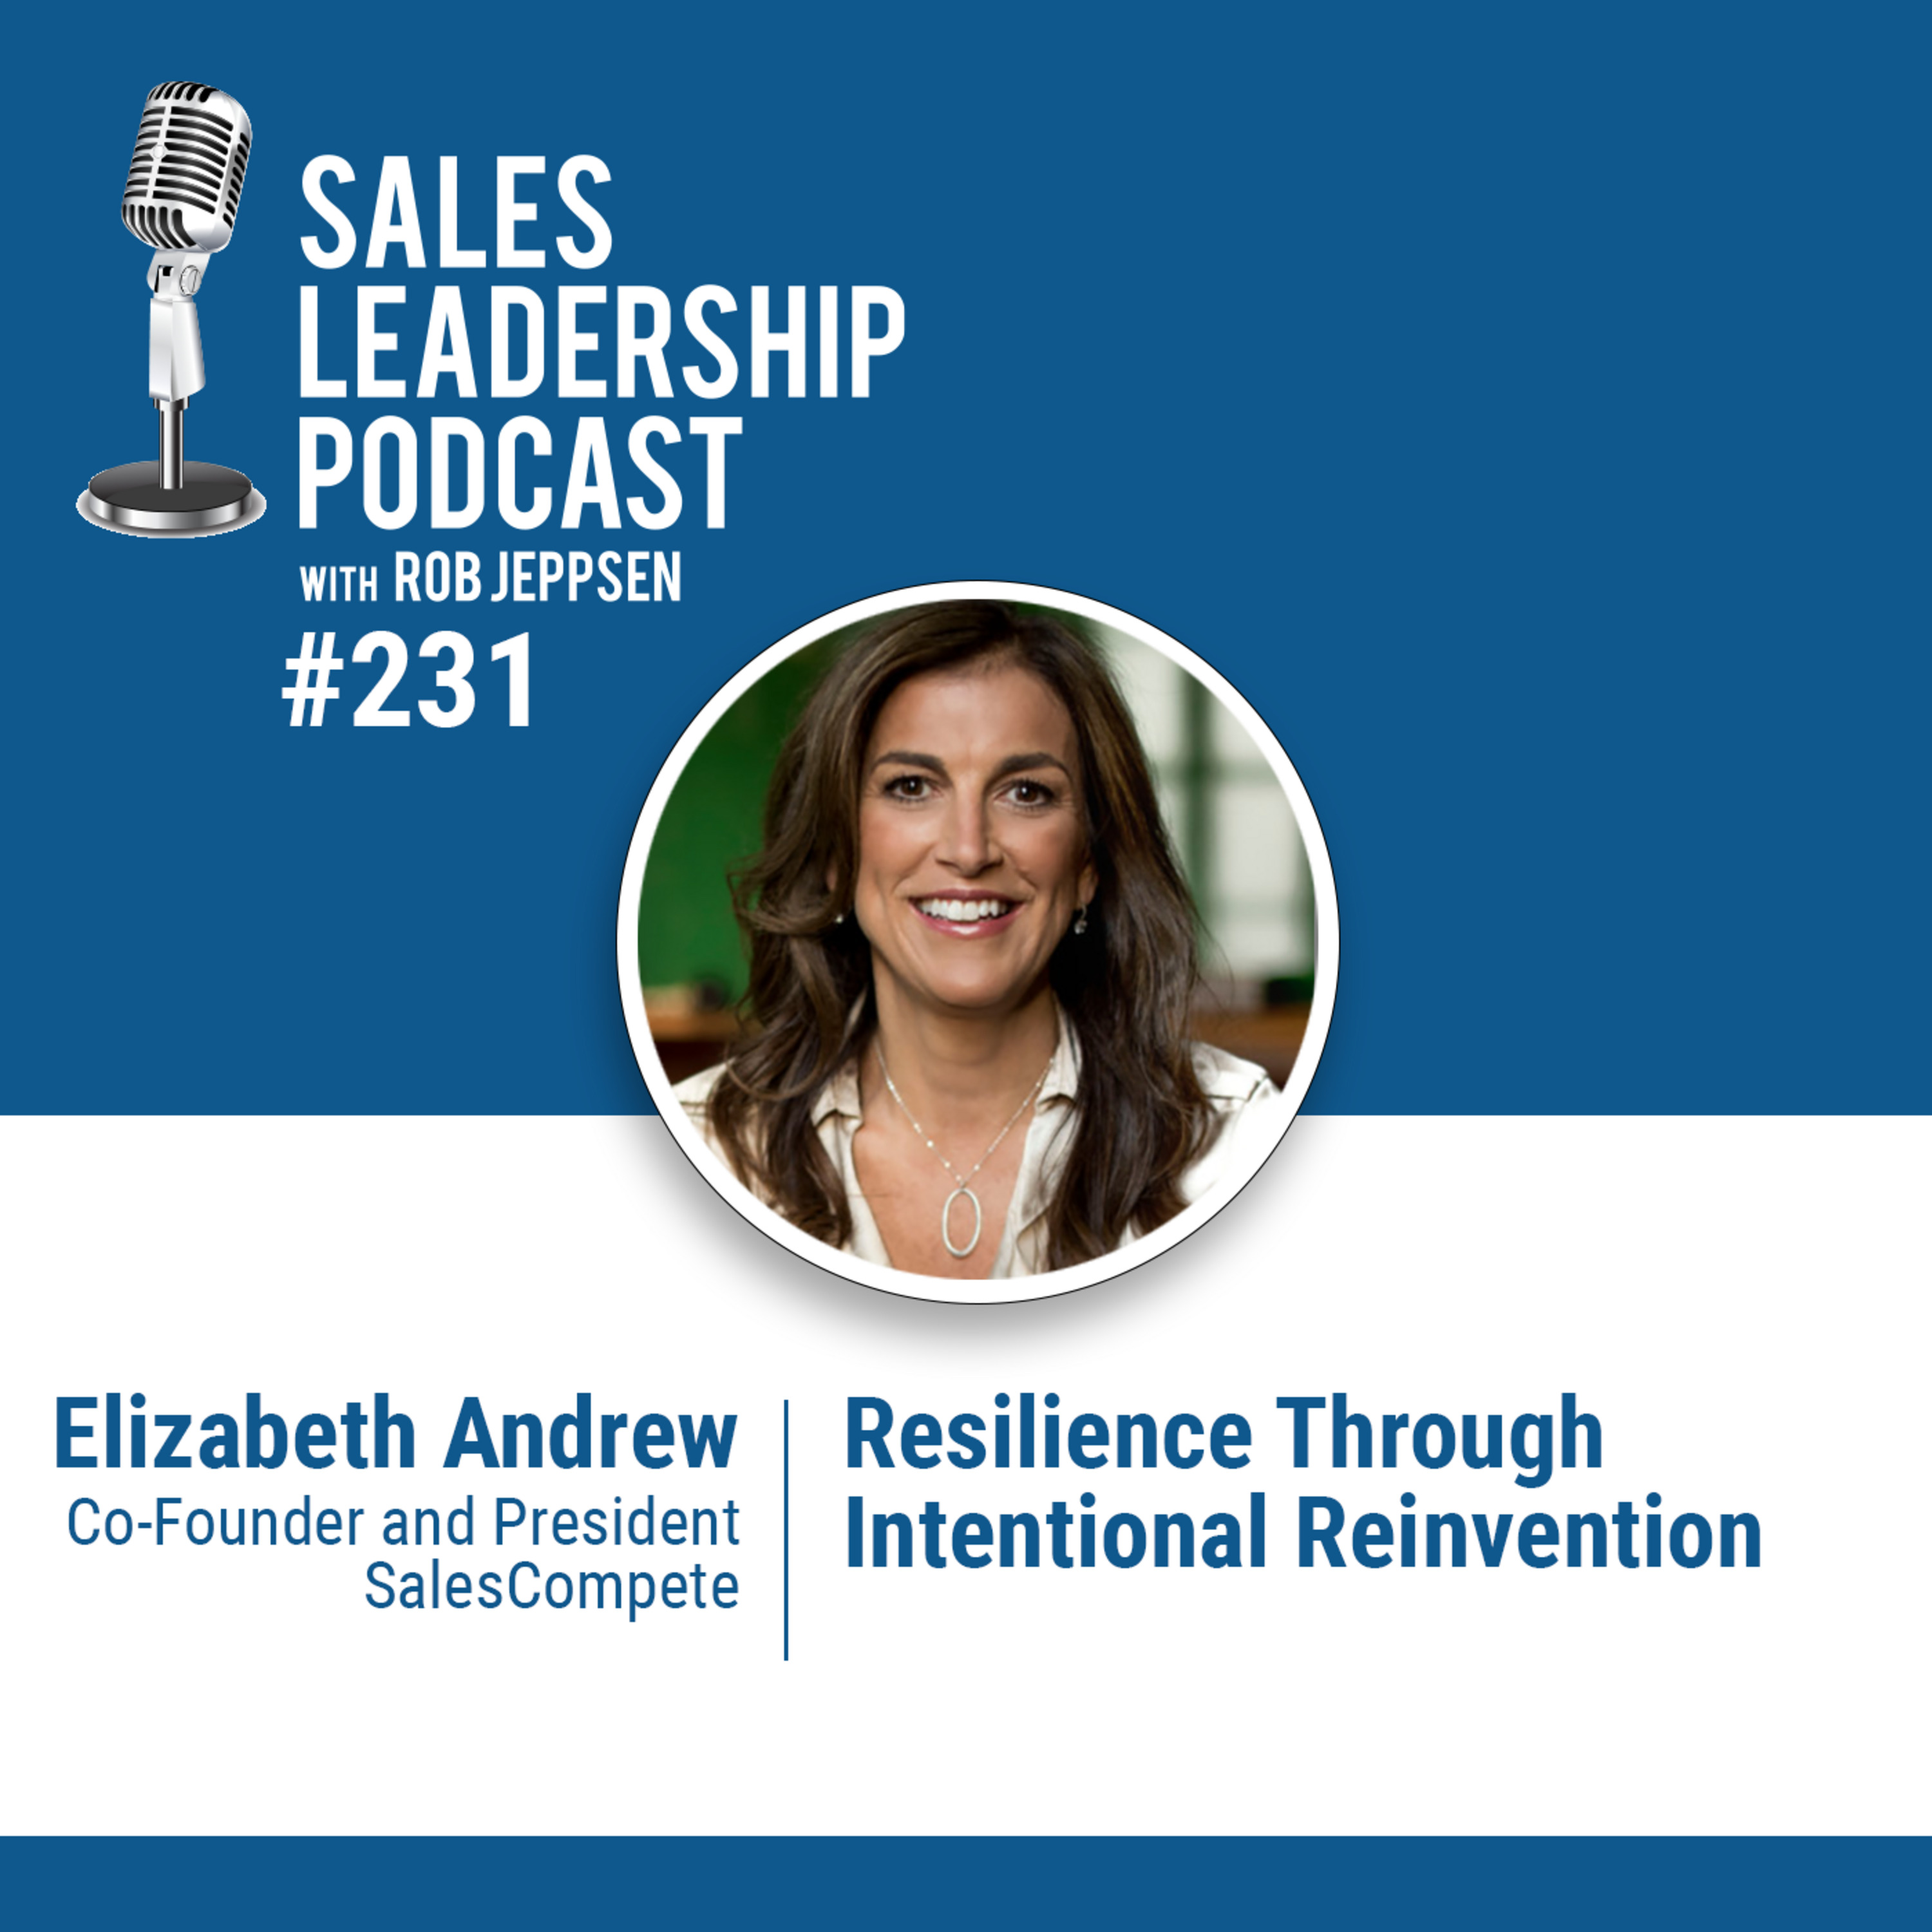 Episode 232: Elizabeth Andrew, Co-Founder and President of SalesCompete - Resilience Through Intentional Reinvention